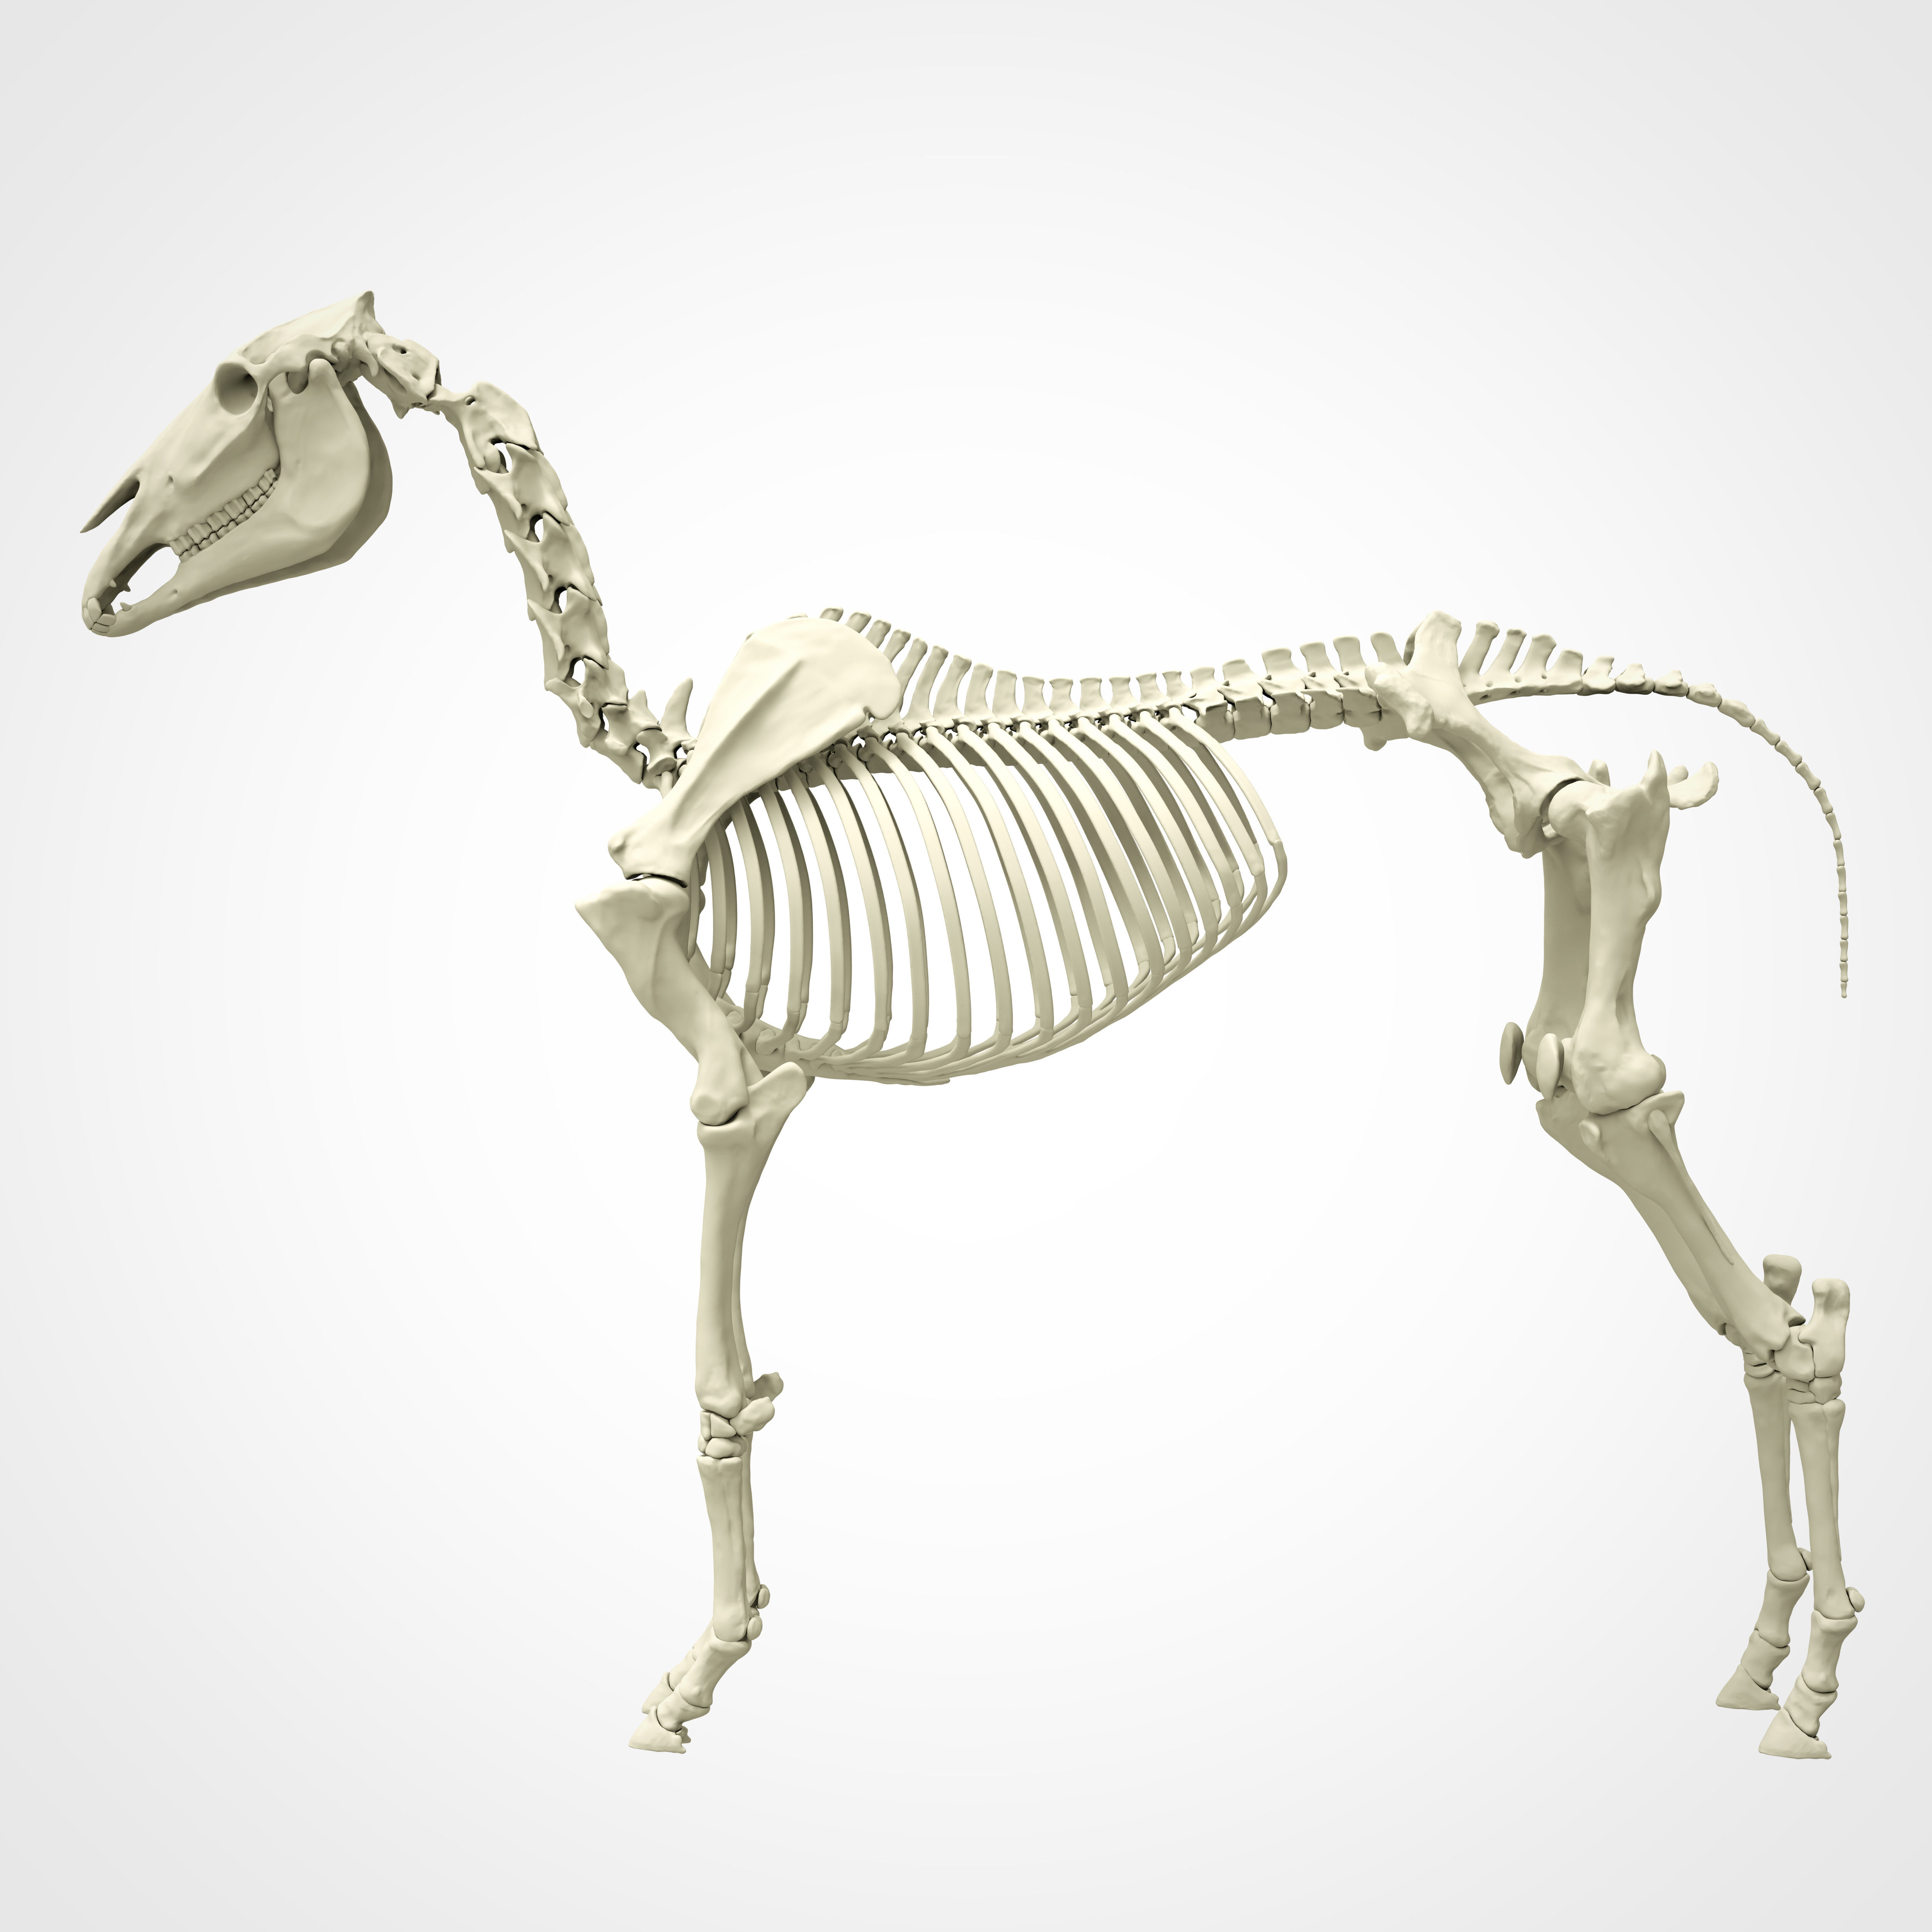 Illustration of a skeleton of a horse, showing the many bones.
